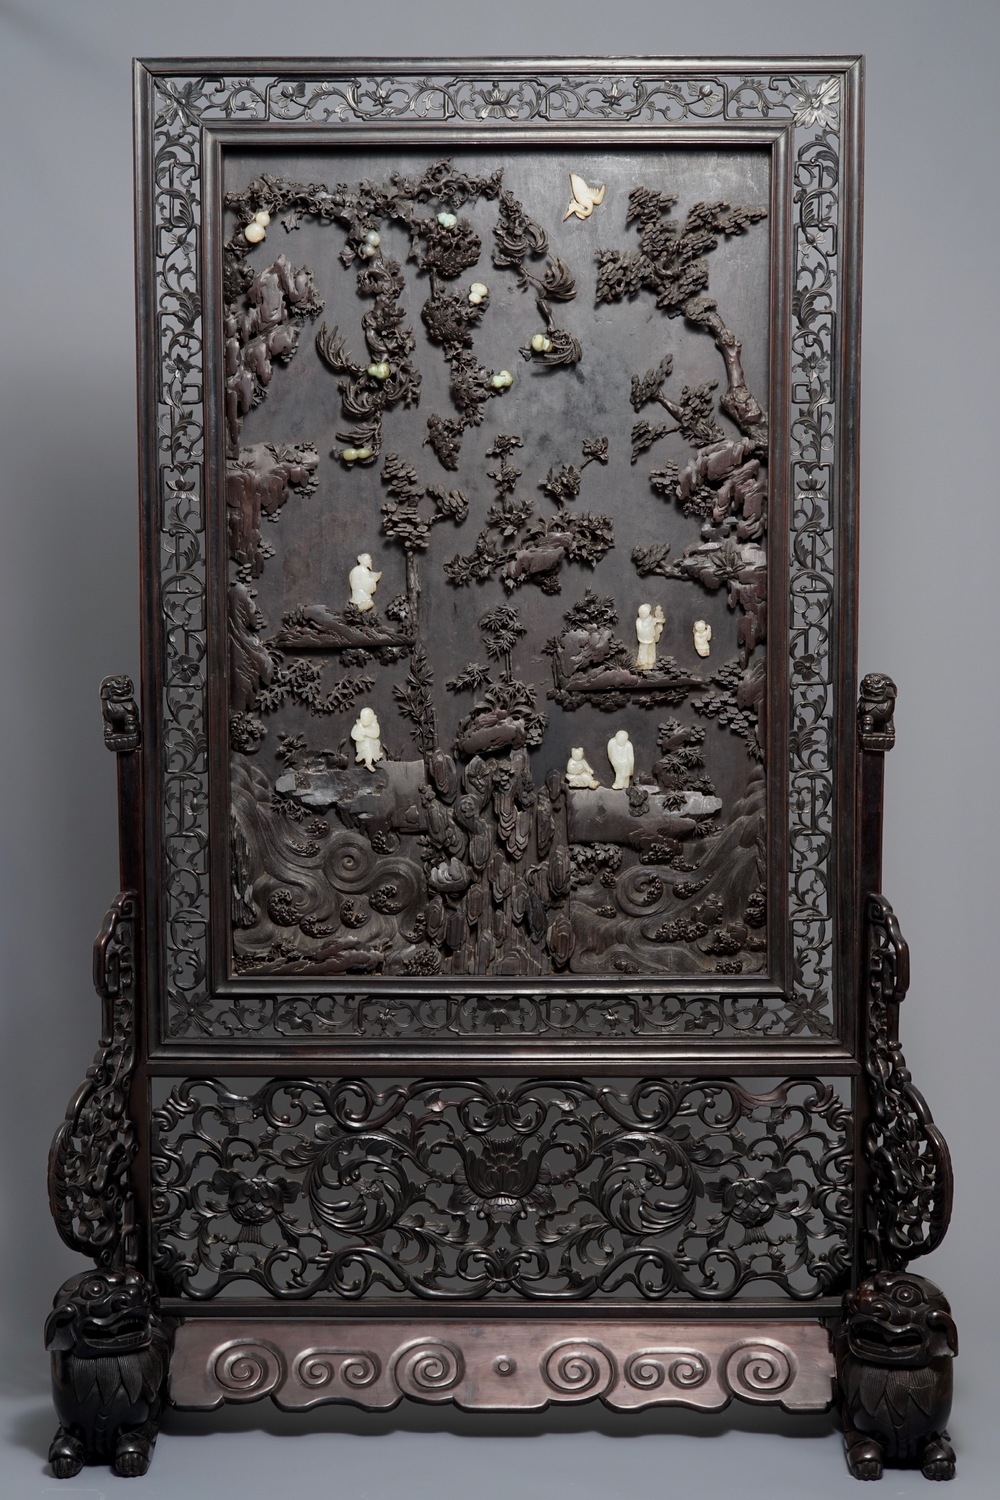 A large Chinese carved zitan wood panel with jade and turquoise, set in a hongmu wood frame and stand, Qianlong